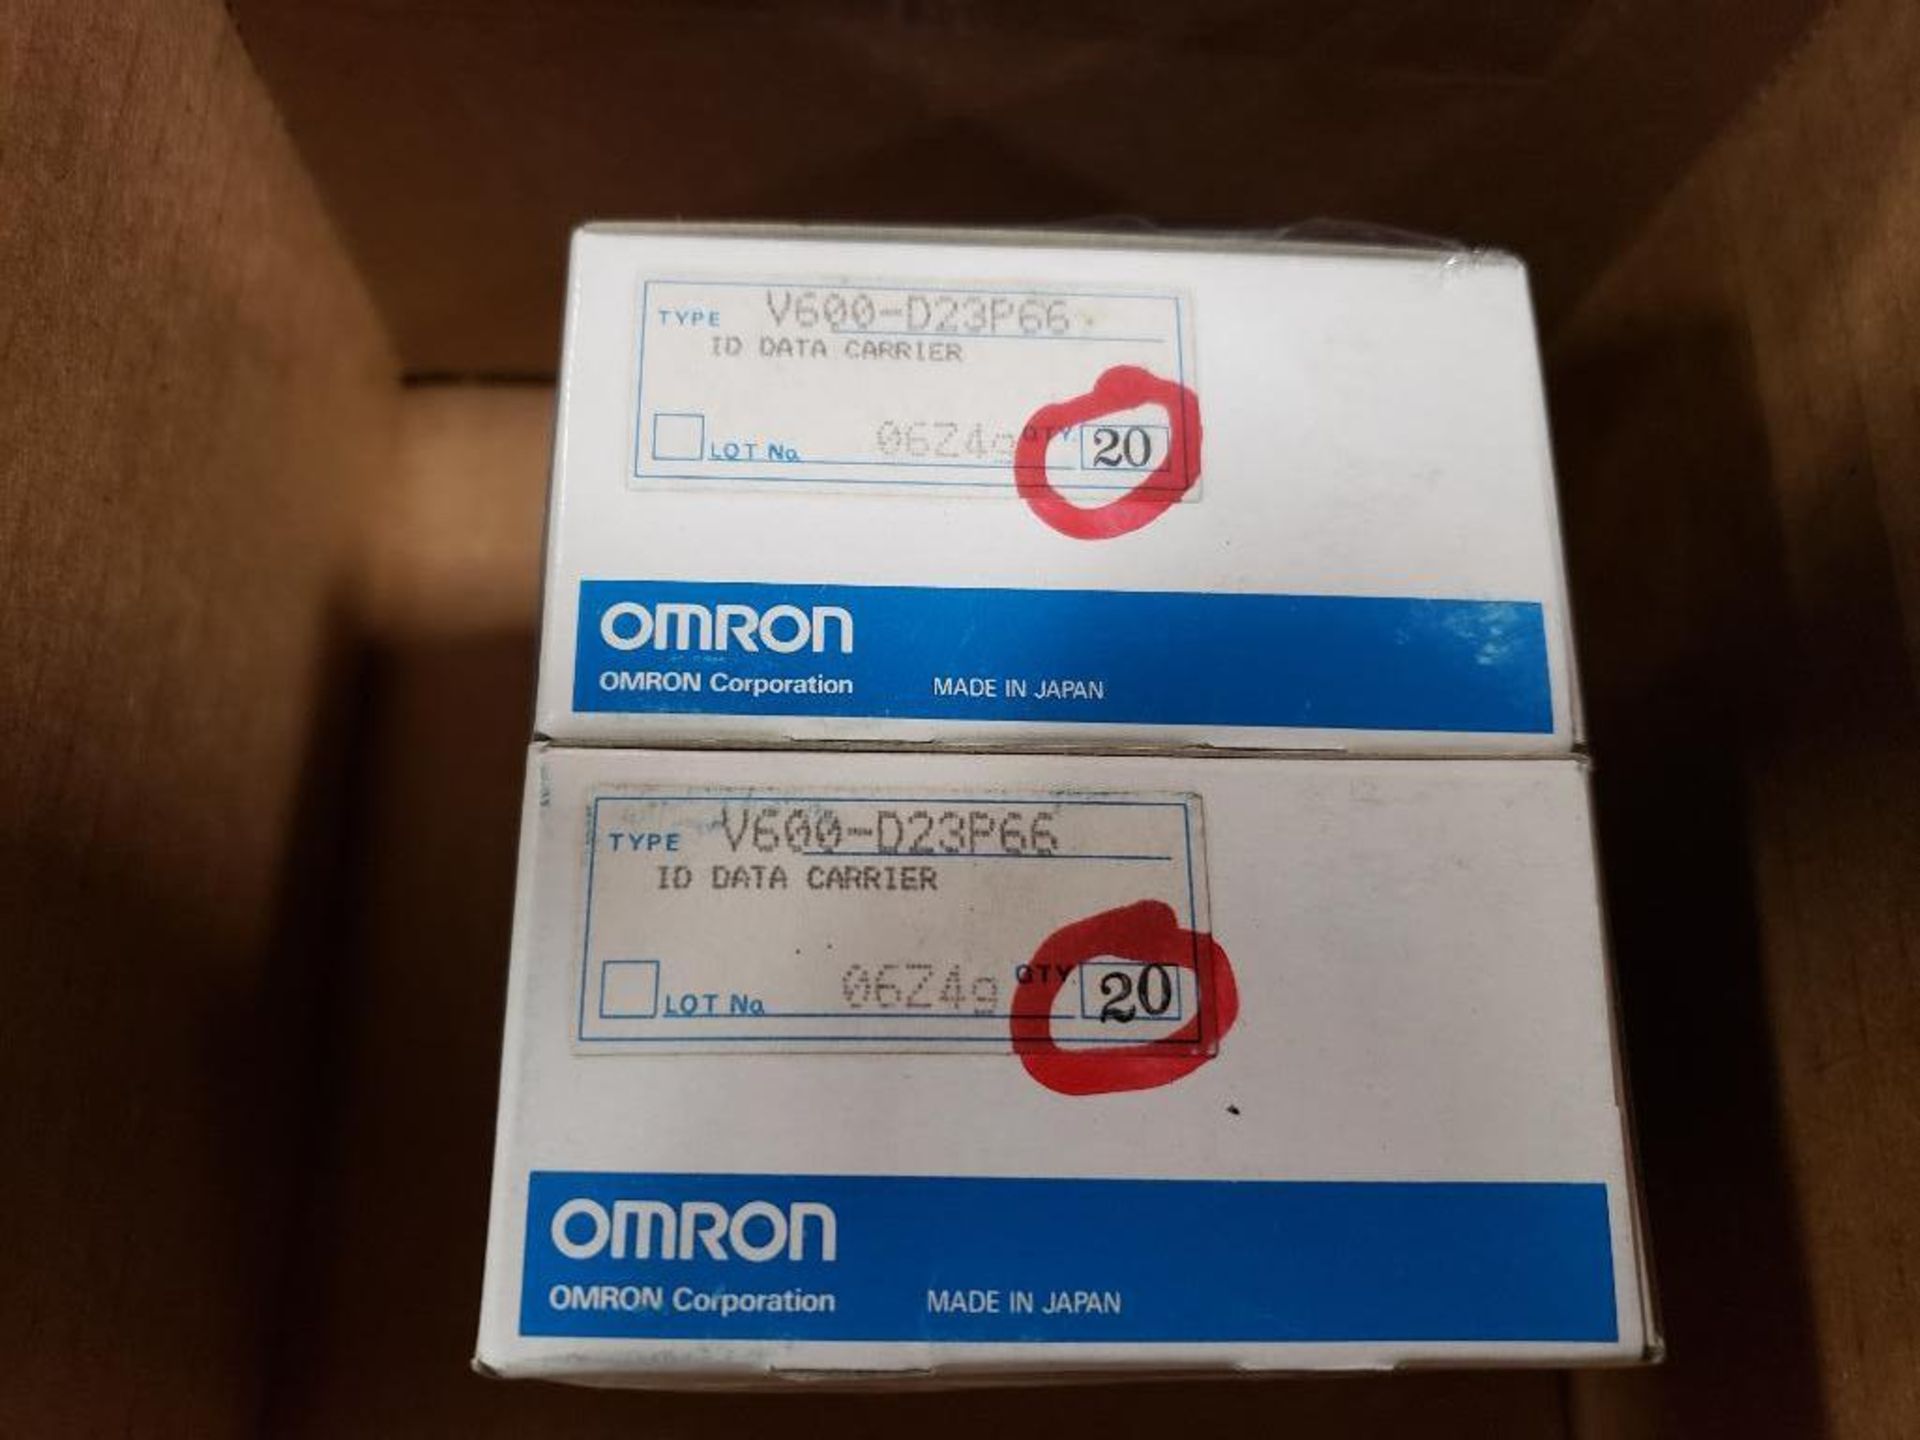 Qty 40 PC - Omron V600-D23P66 ID data carrier. (2) 20Ct boxes. New in box. - Image 2 of 2